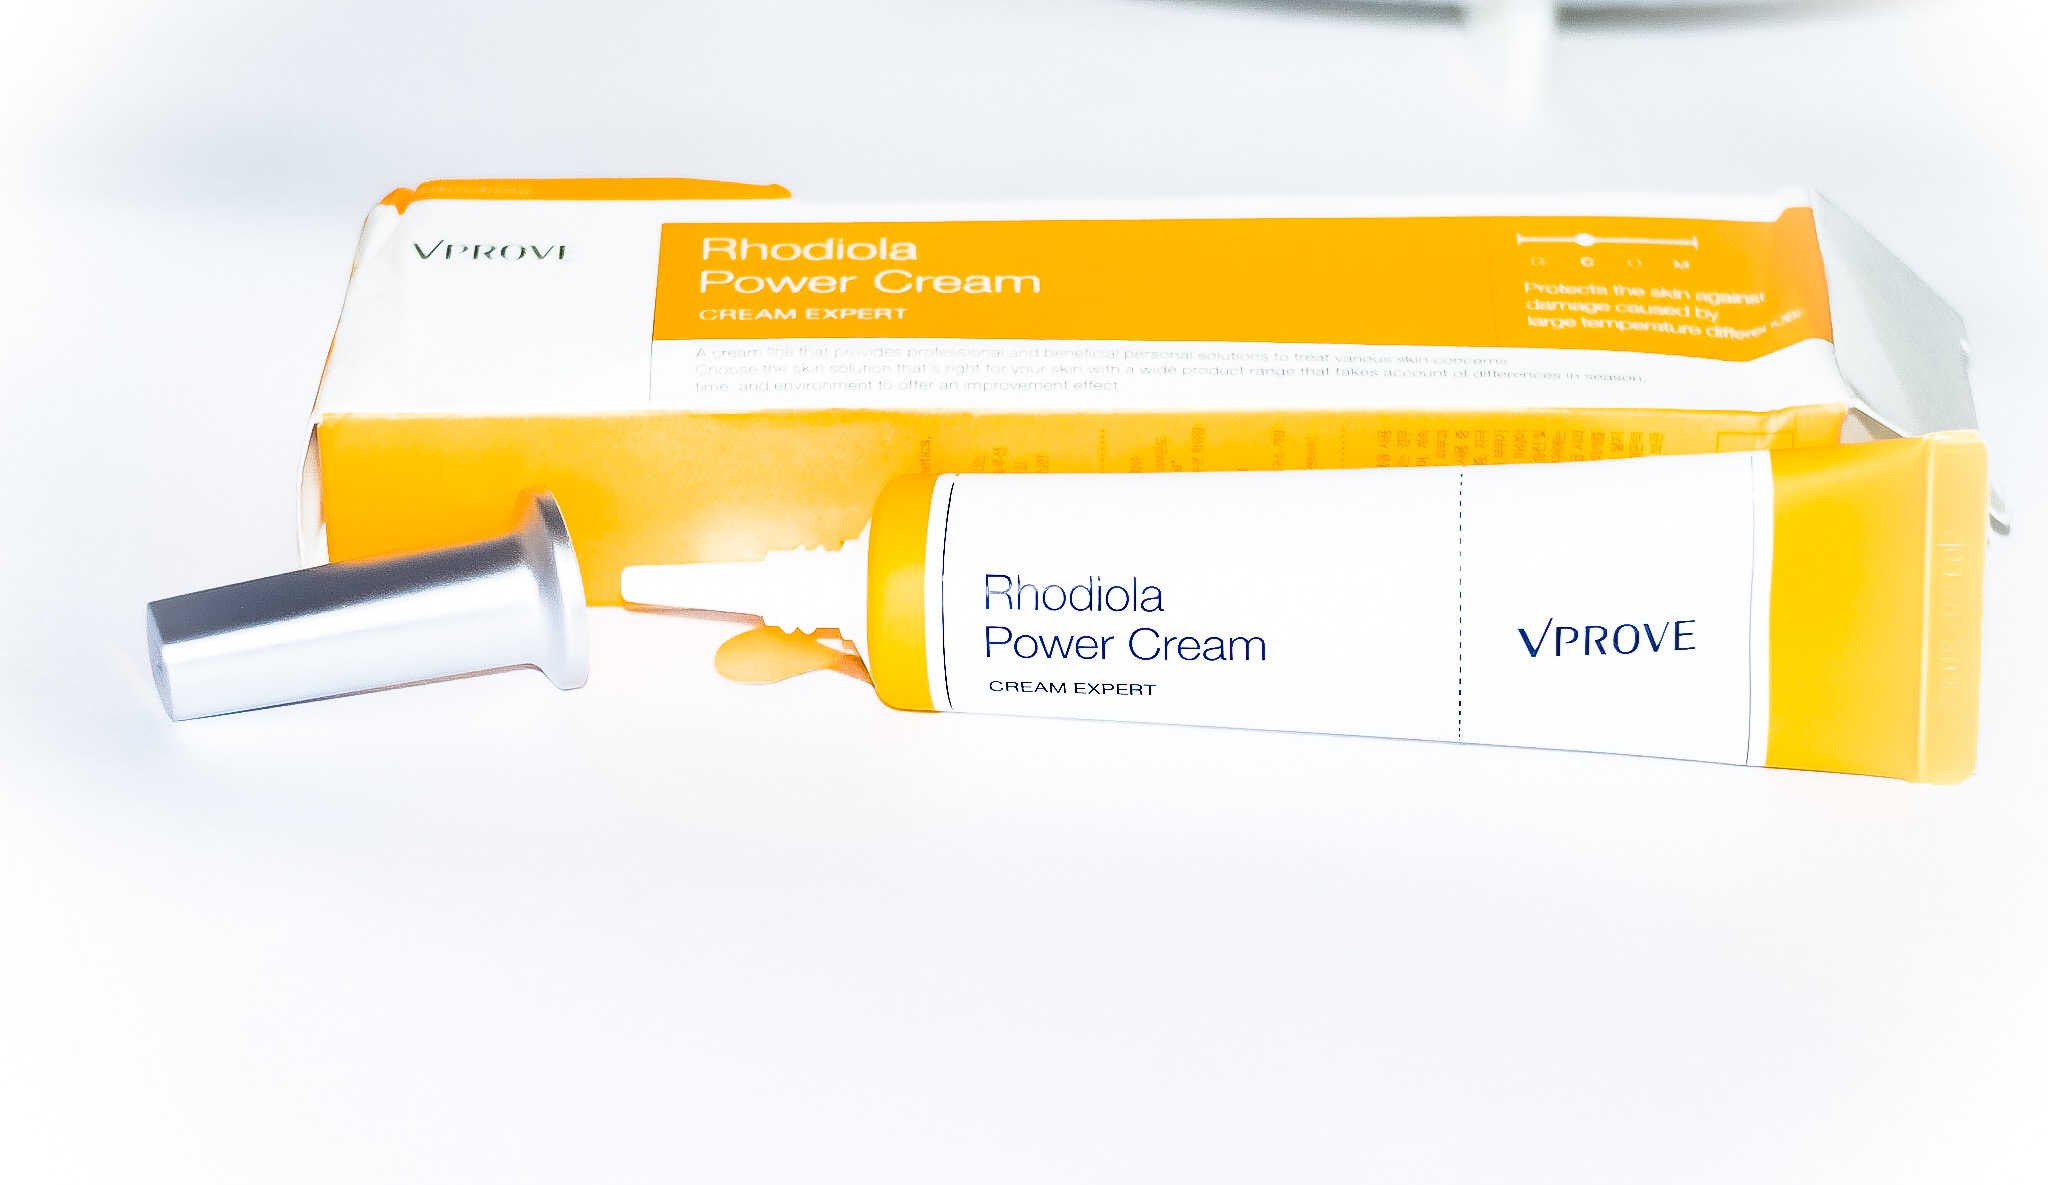 VPROVE Rhodiola Power Cream Review